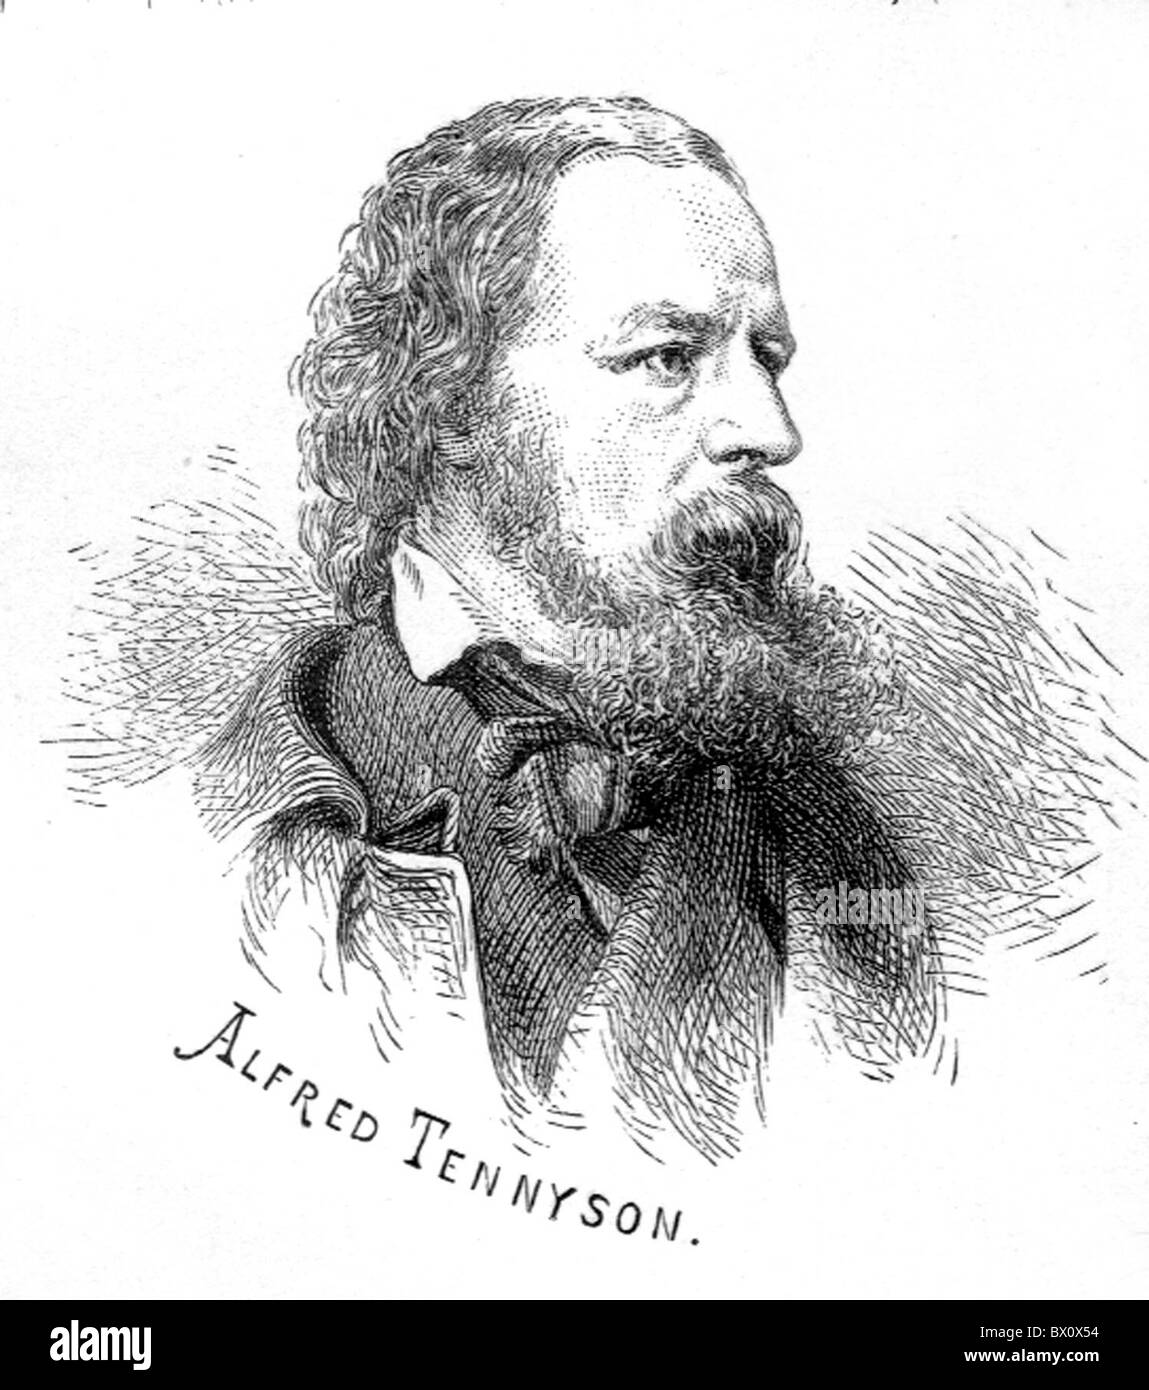 Archive image of historical literary figures. This is Lord Alfred Tennyson. Stock Photo